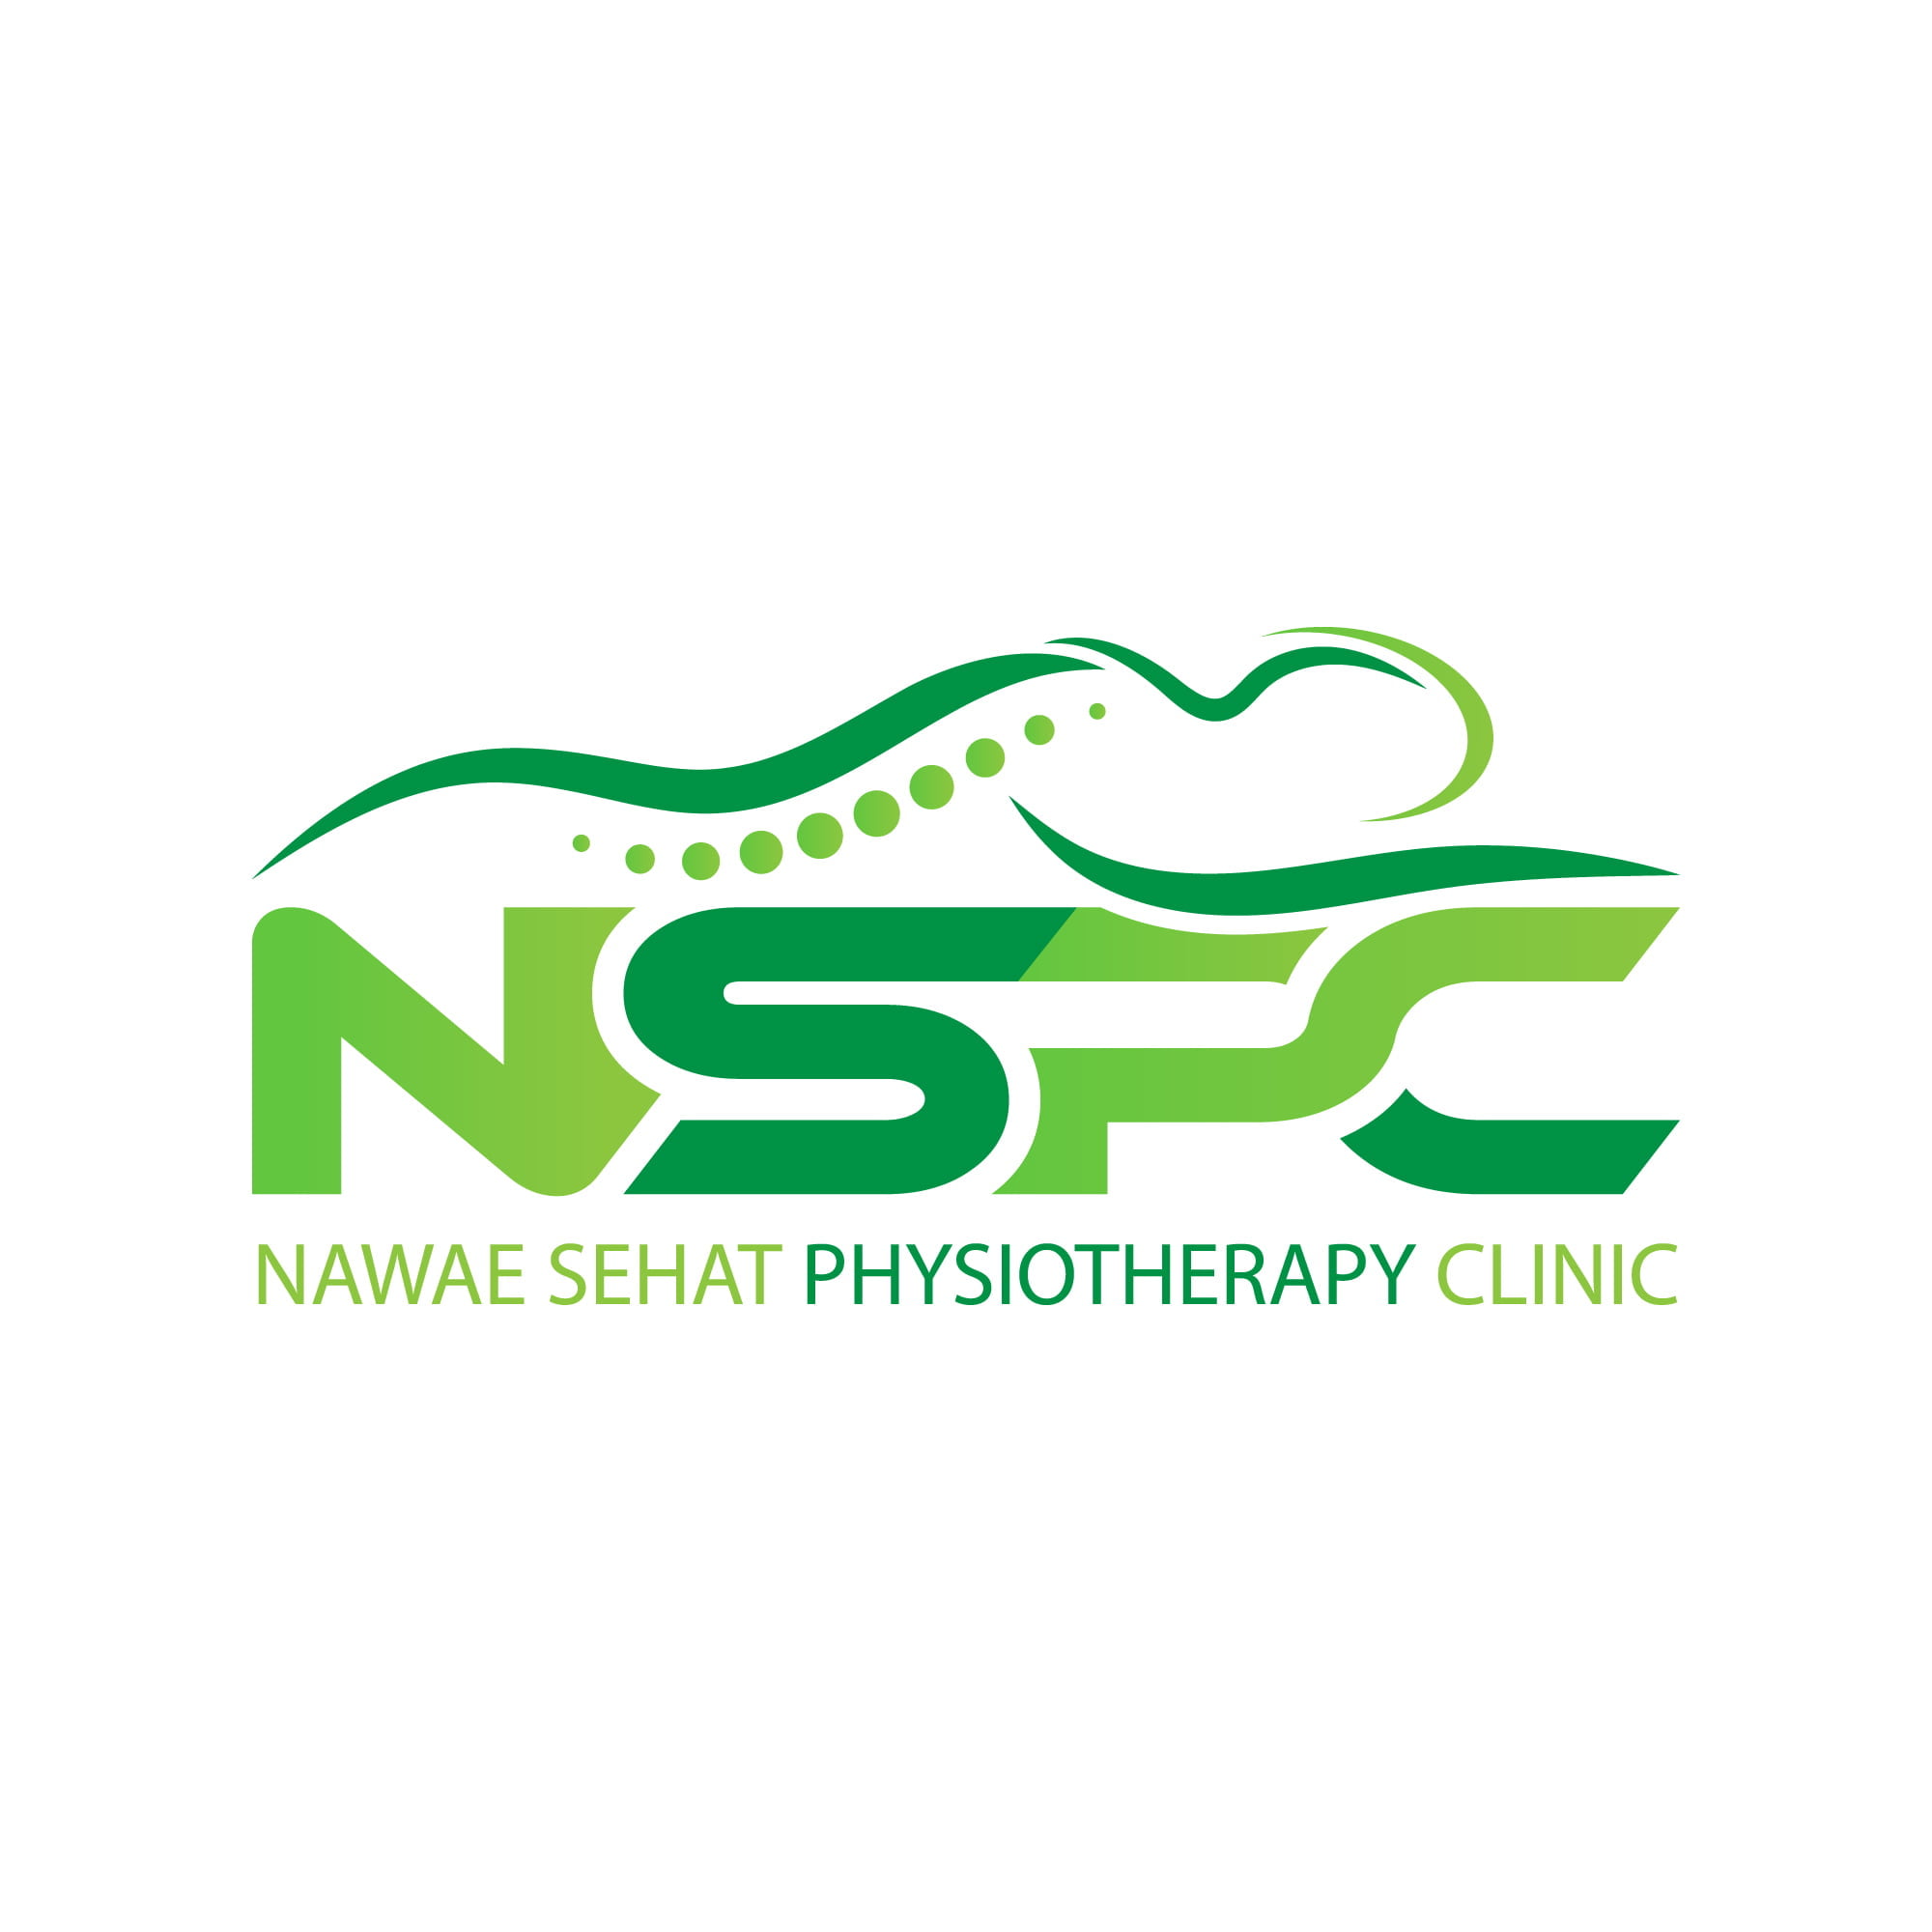 Chiropractic physiotherapy logo design creative Vector Image